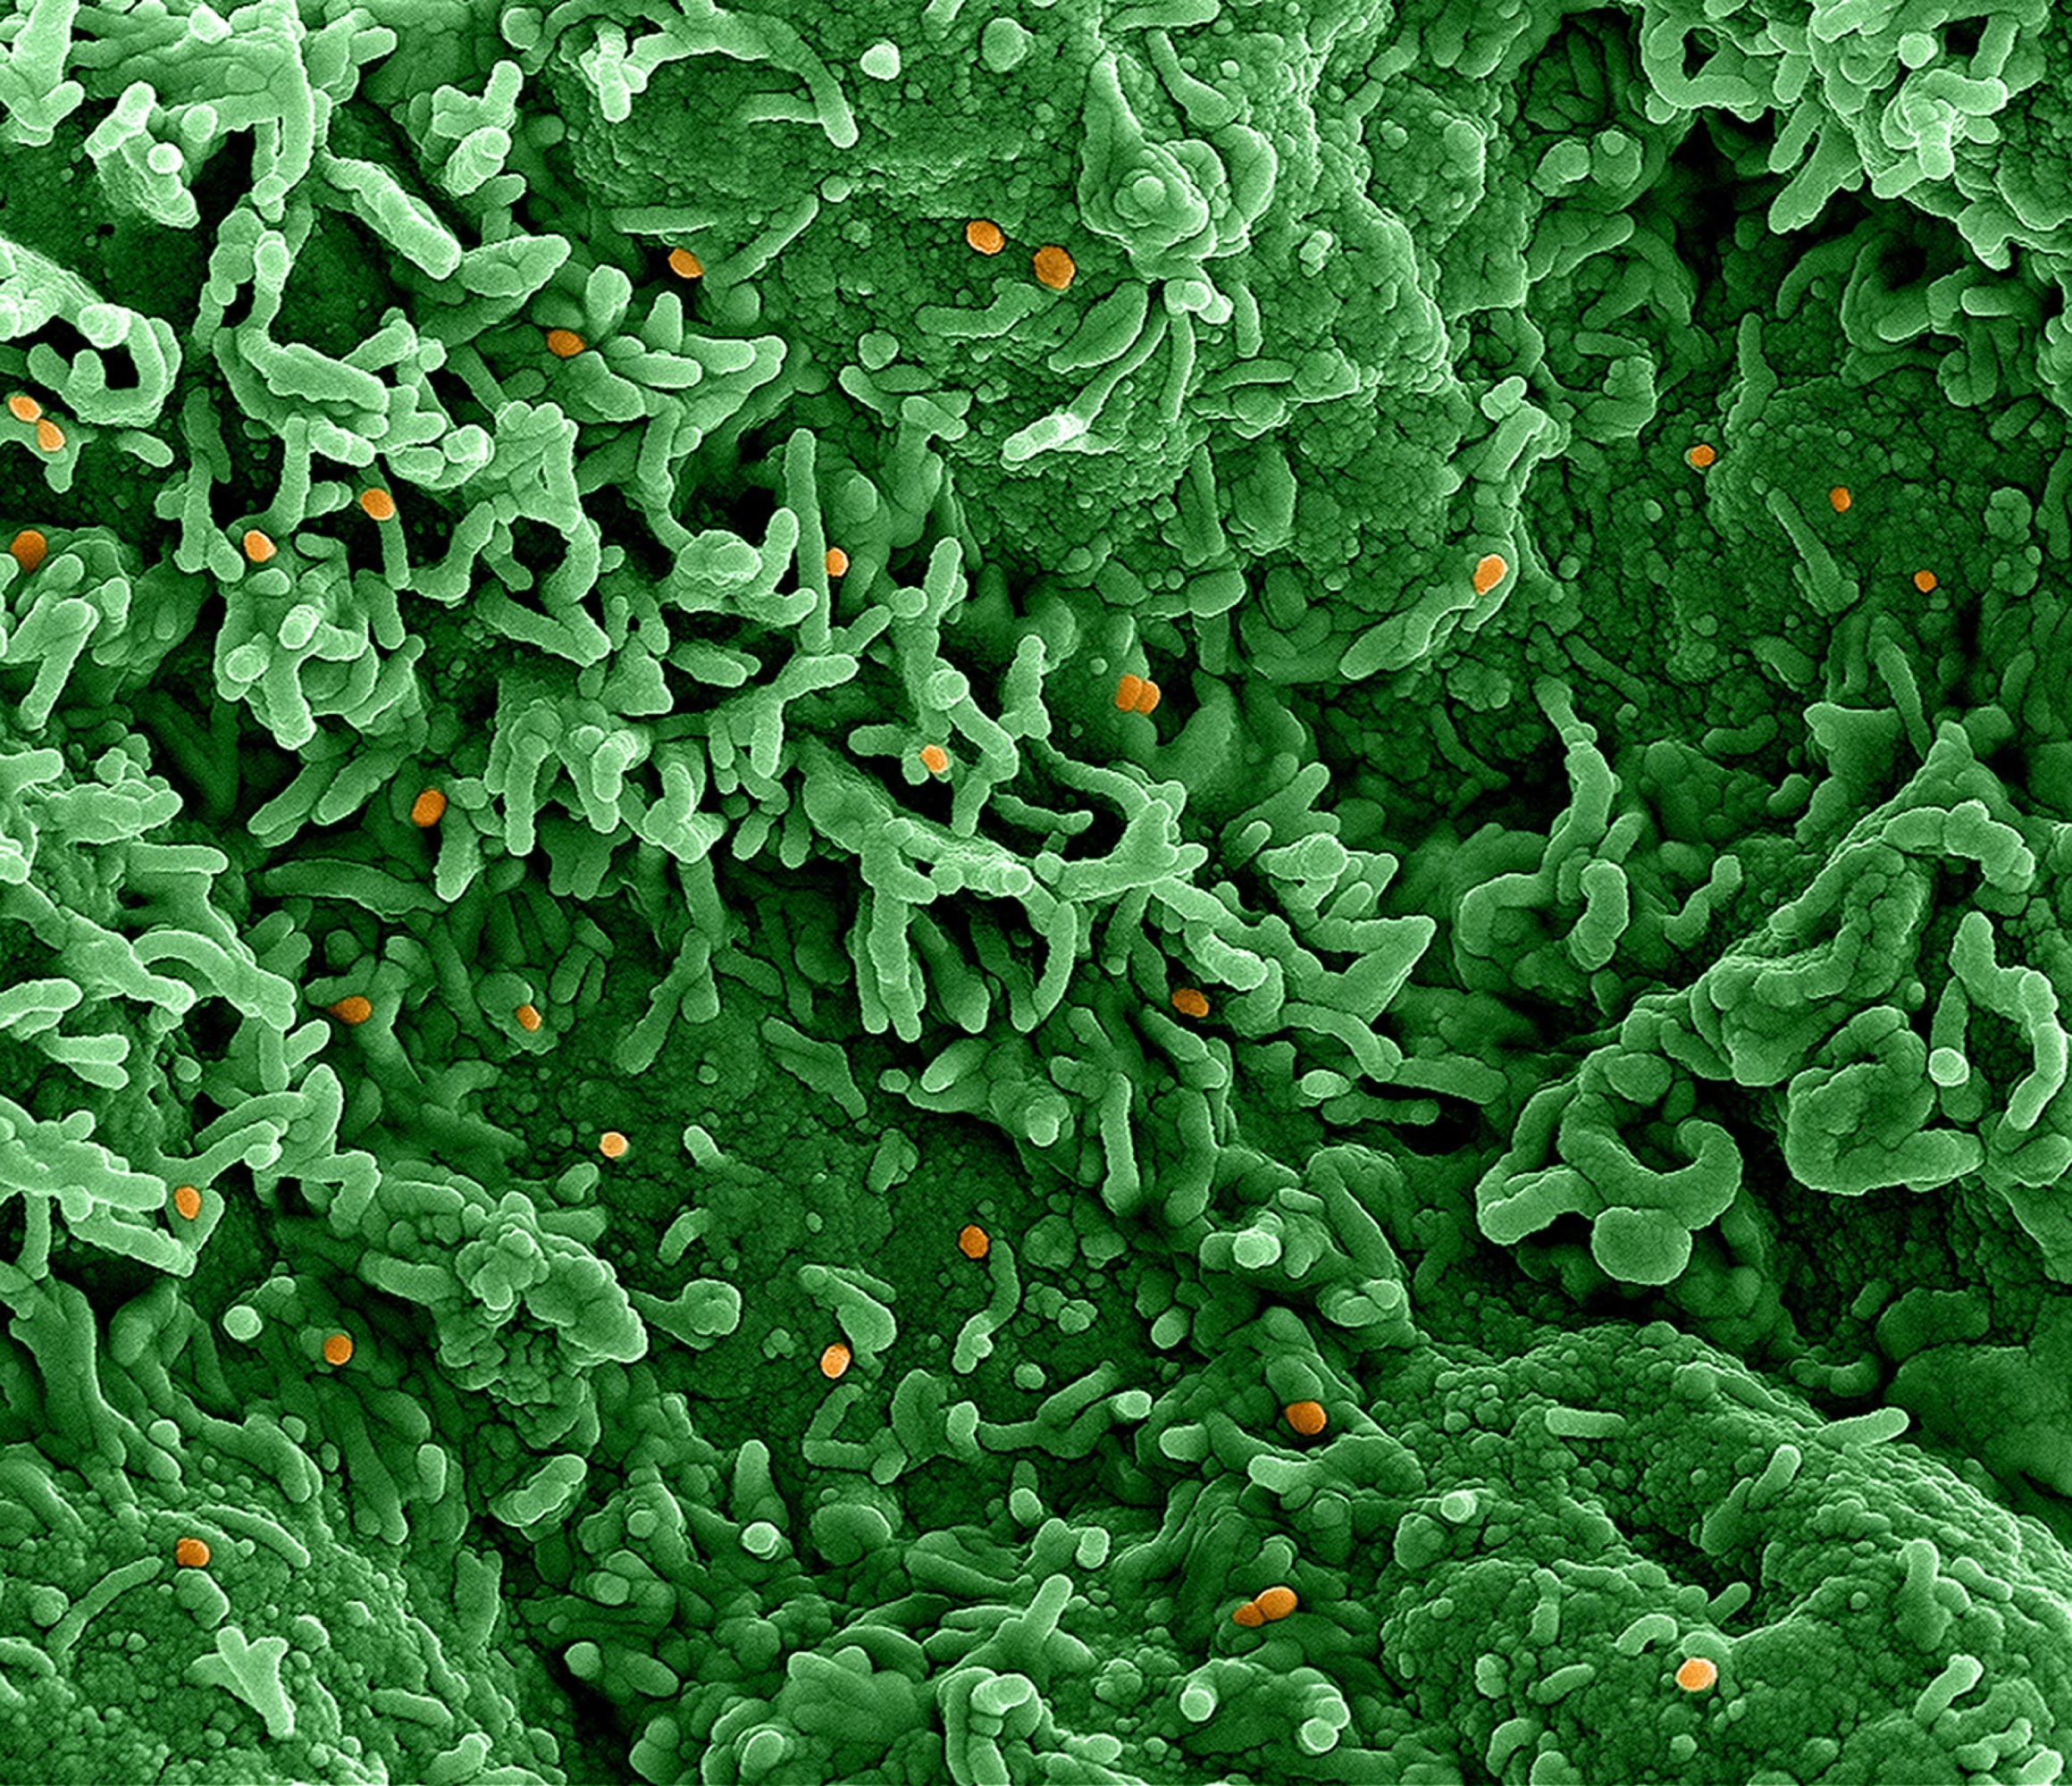 Orange dots appear scattered in a series of green protrusions and tubes.